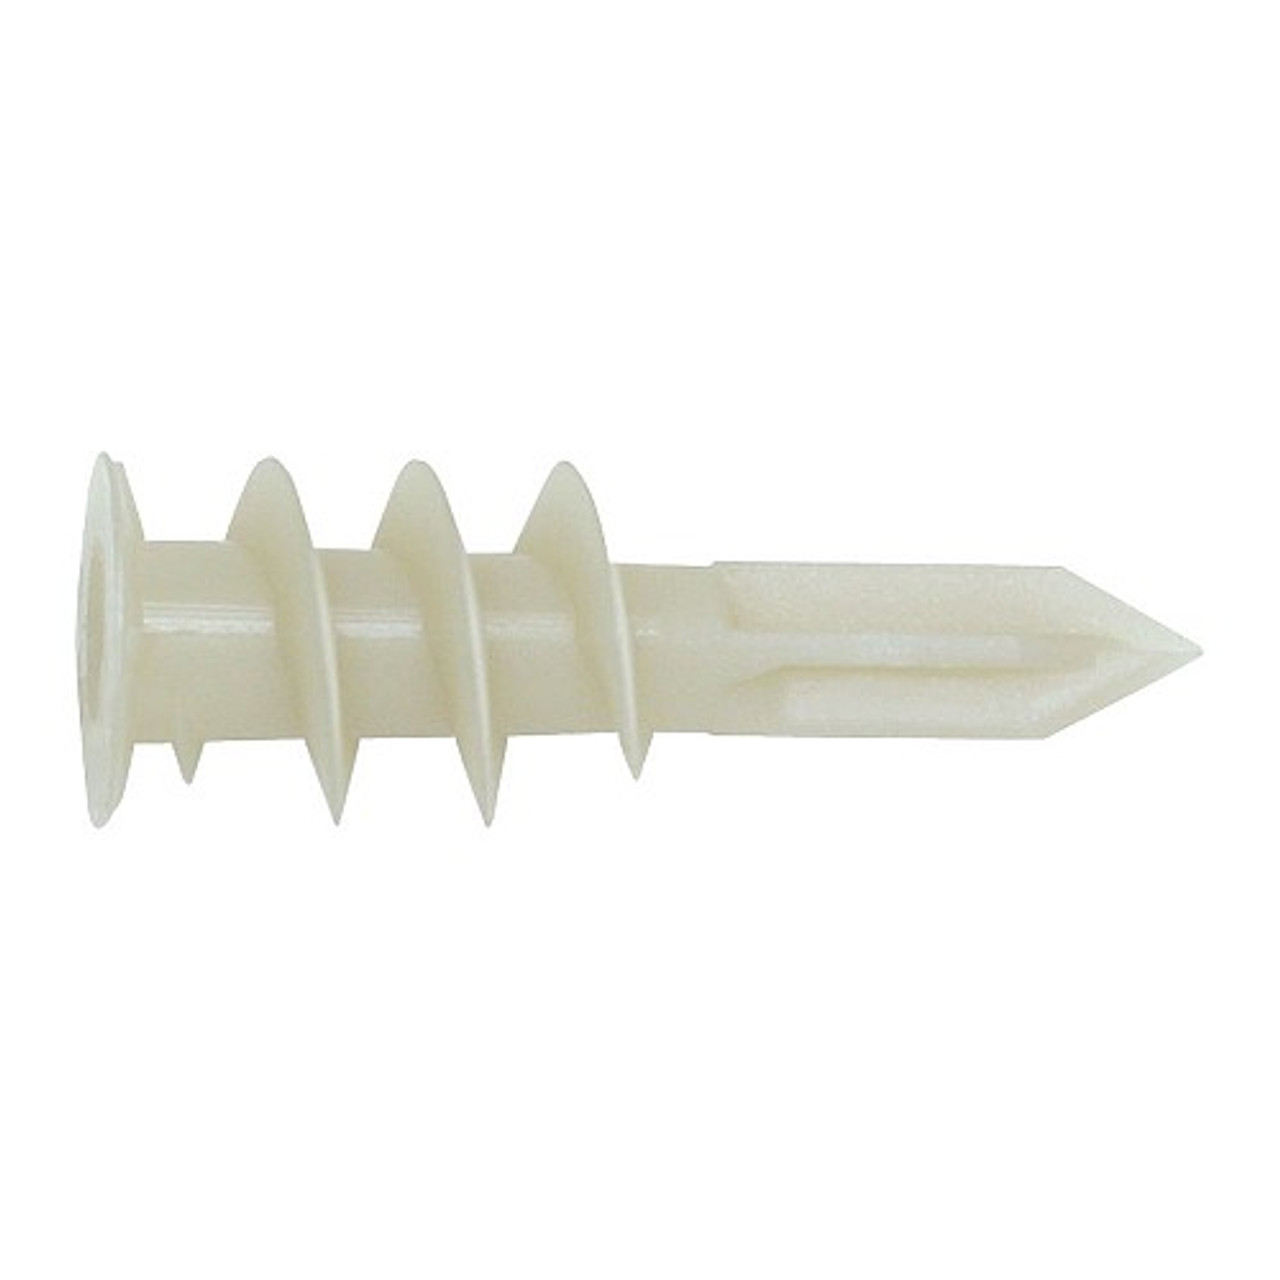 Nylon Zip-It Anchors - Self Drilling with #8 X 1 Screws